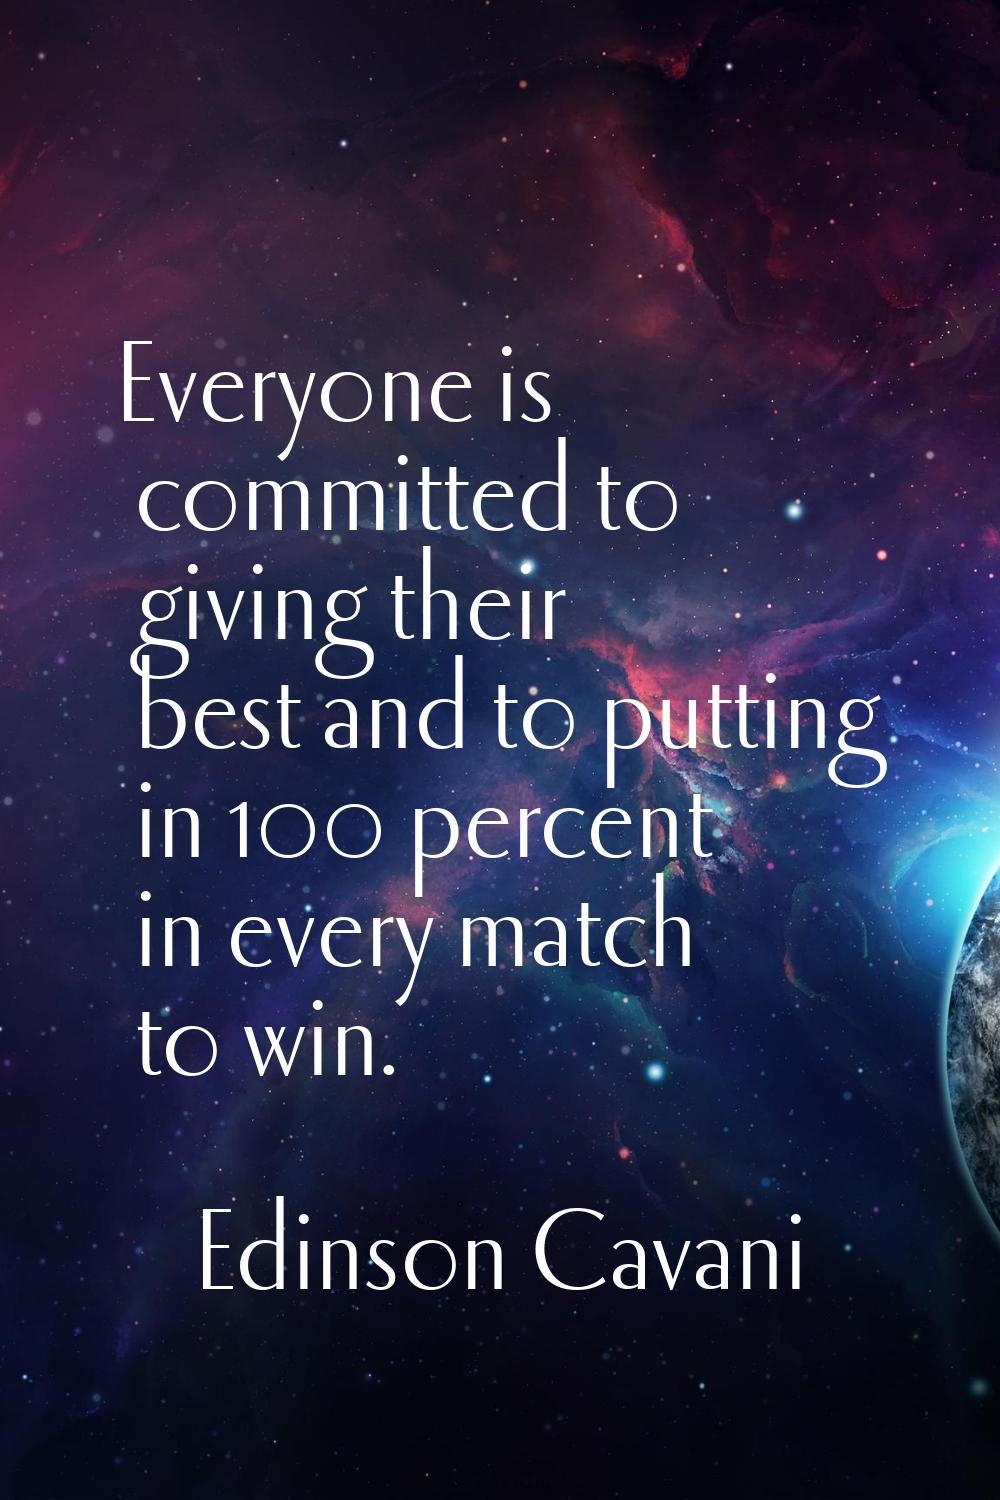 Everyone is committed to giving their best and to putting in 100 percent in every match to win.